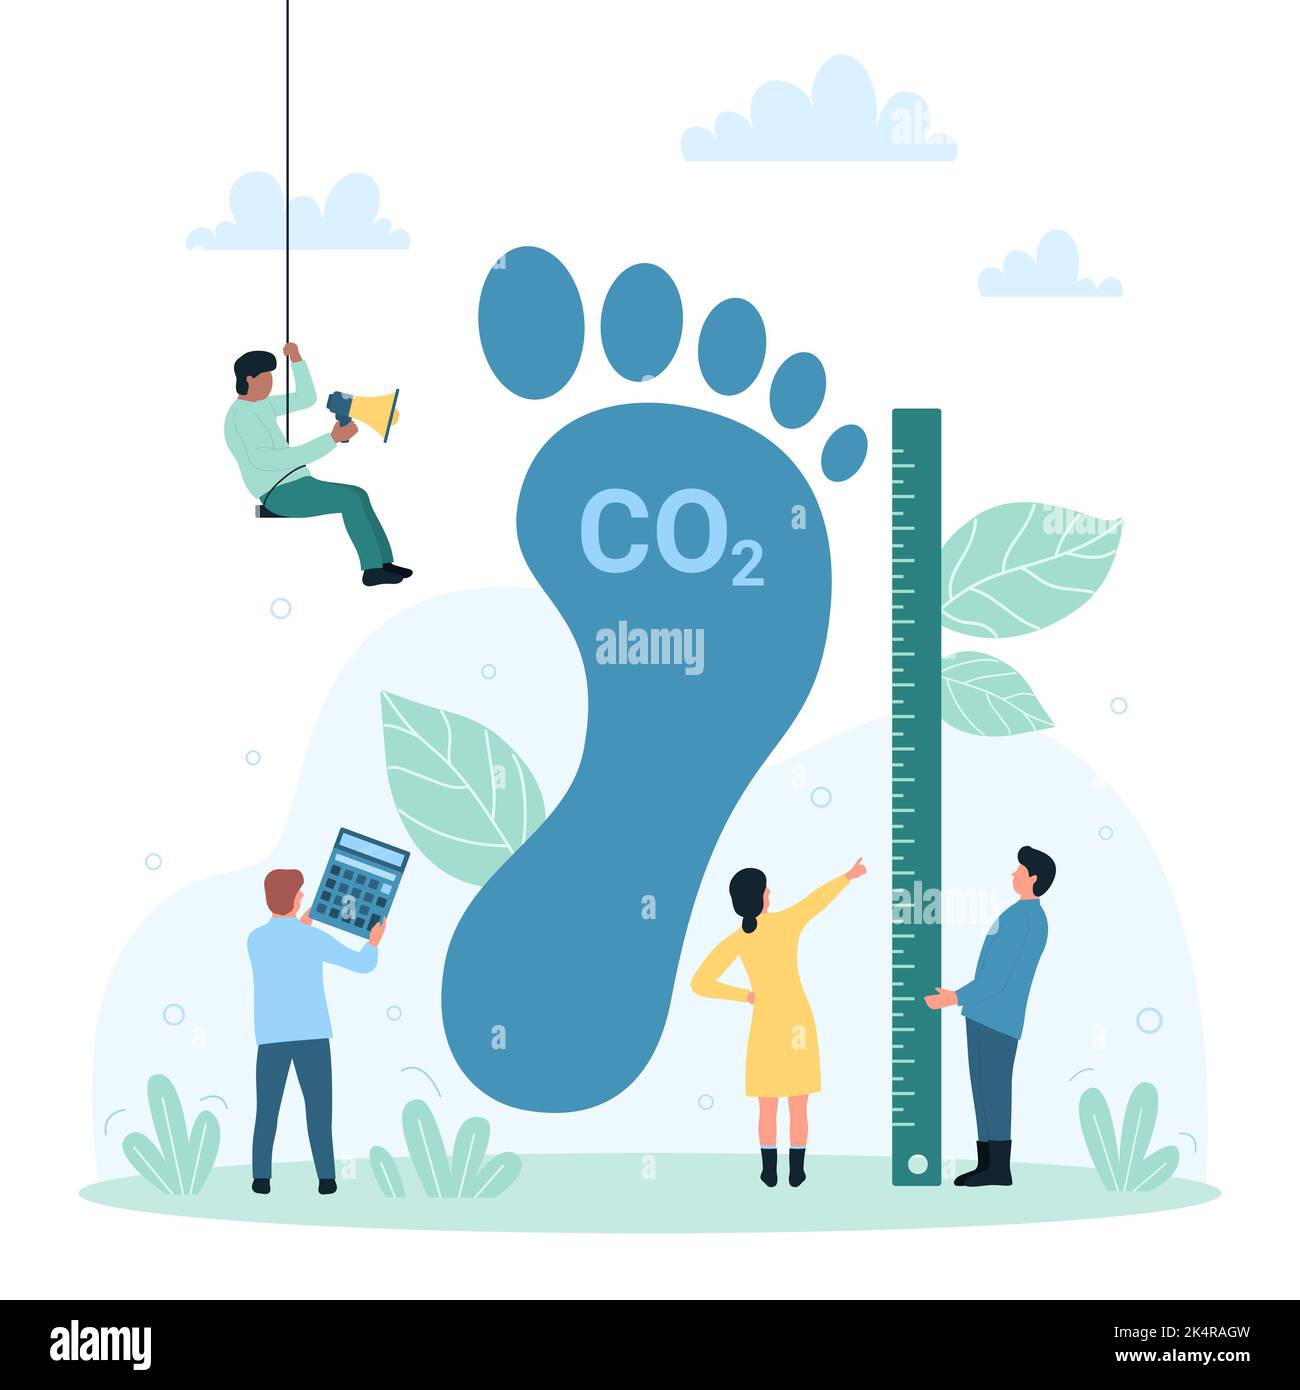 Carbon footprint calculator Cut Out Stock Images & Pictures - Alamy